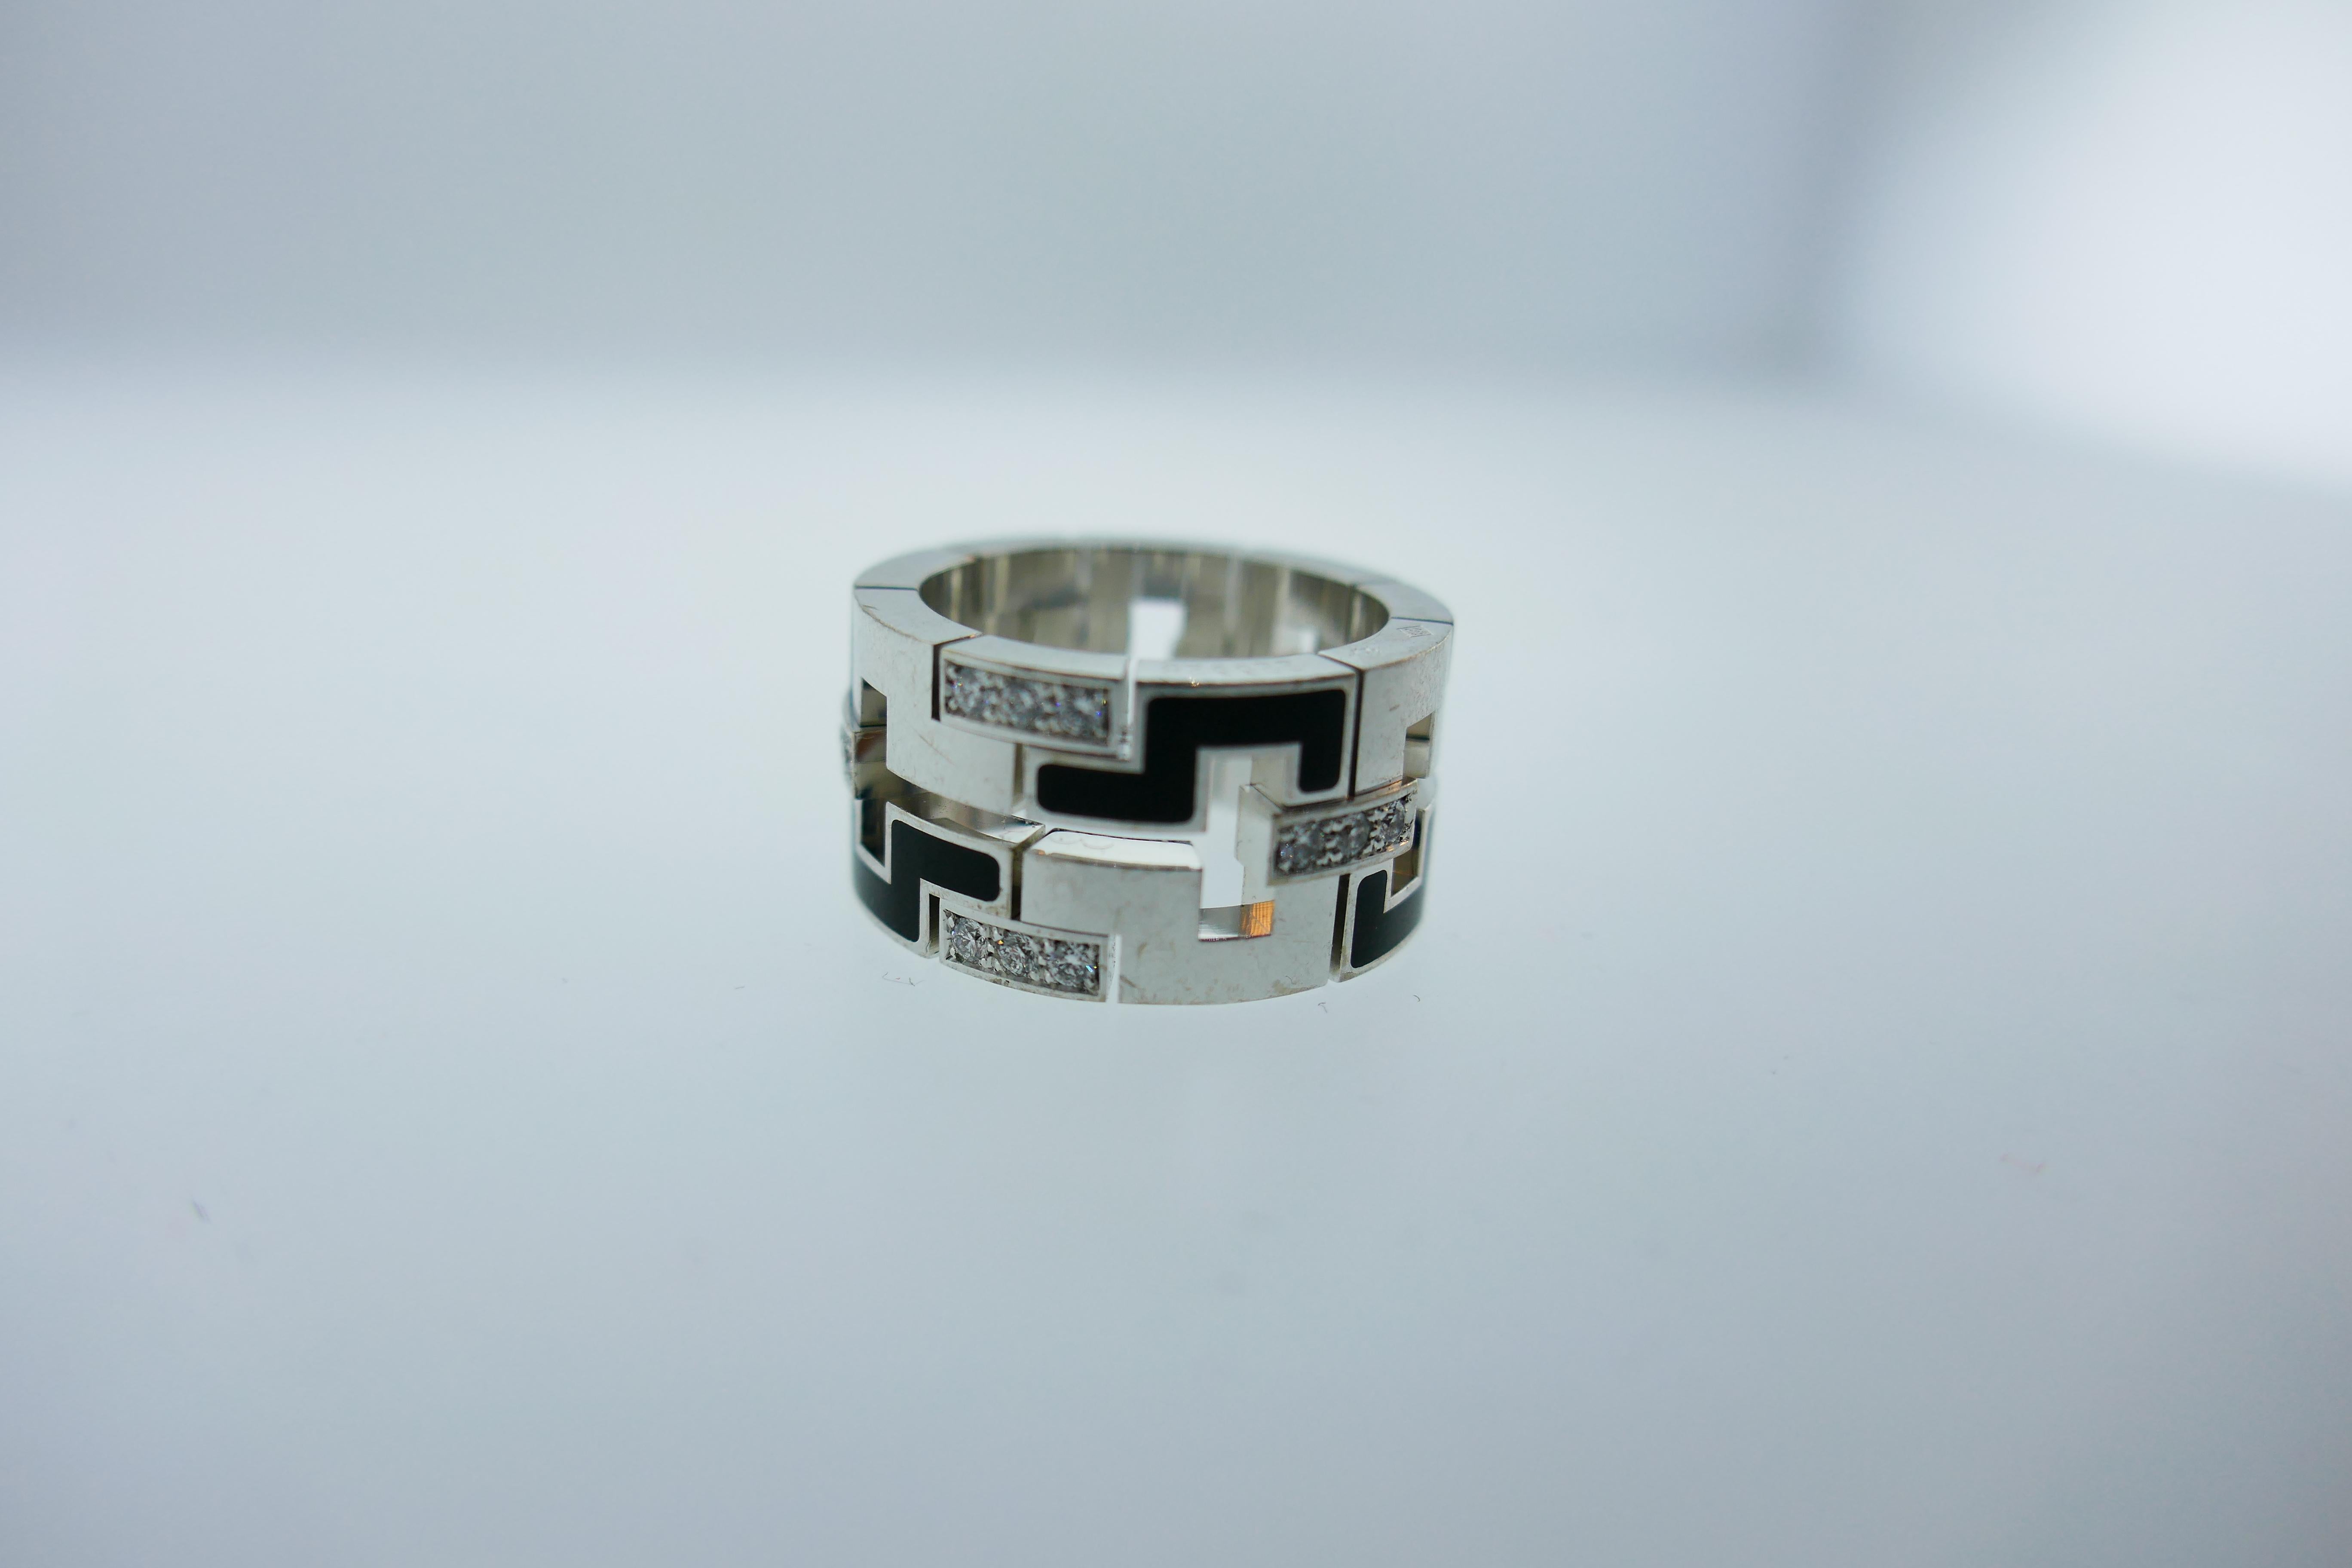 Here is your chance to purchase a beautiful and highly collectible designer ring.  Truly a great piece at a great price! 


Weight: 18.1 grams

Dimensions: 11 mm wide by 3 mm thick

Condition: Great

Signature: Cartier / French eagle hallmark /